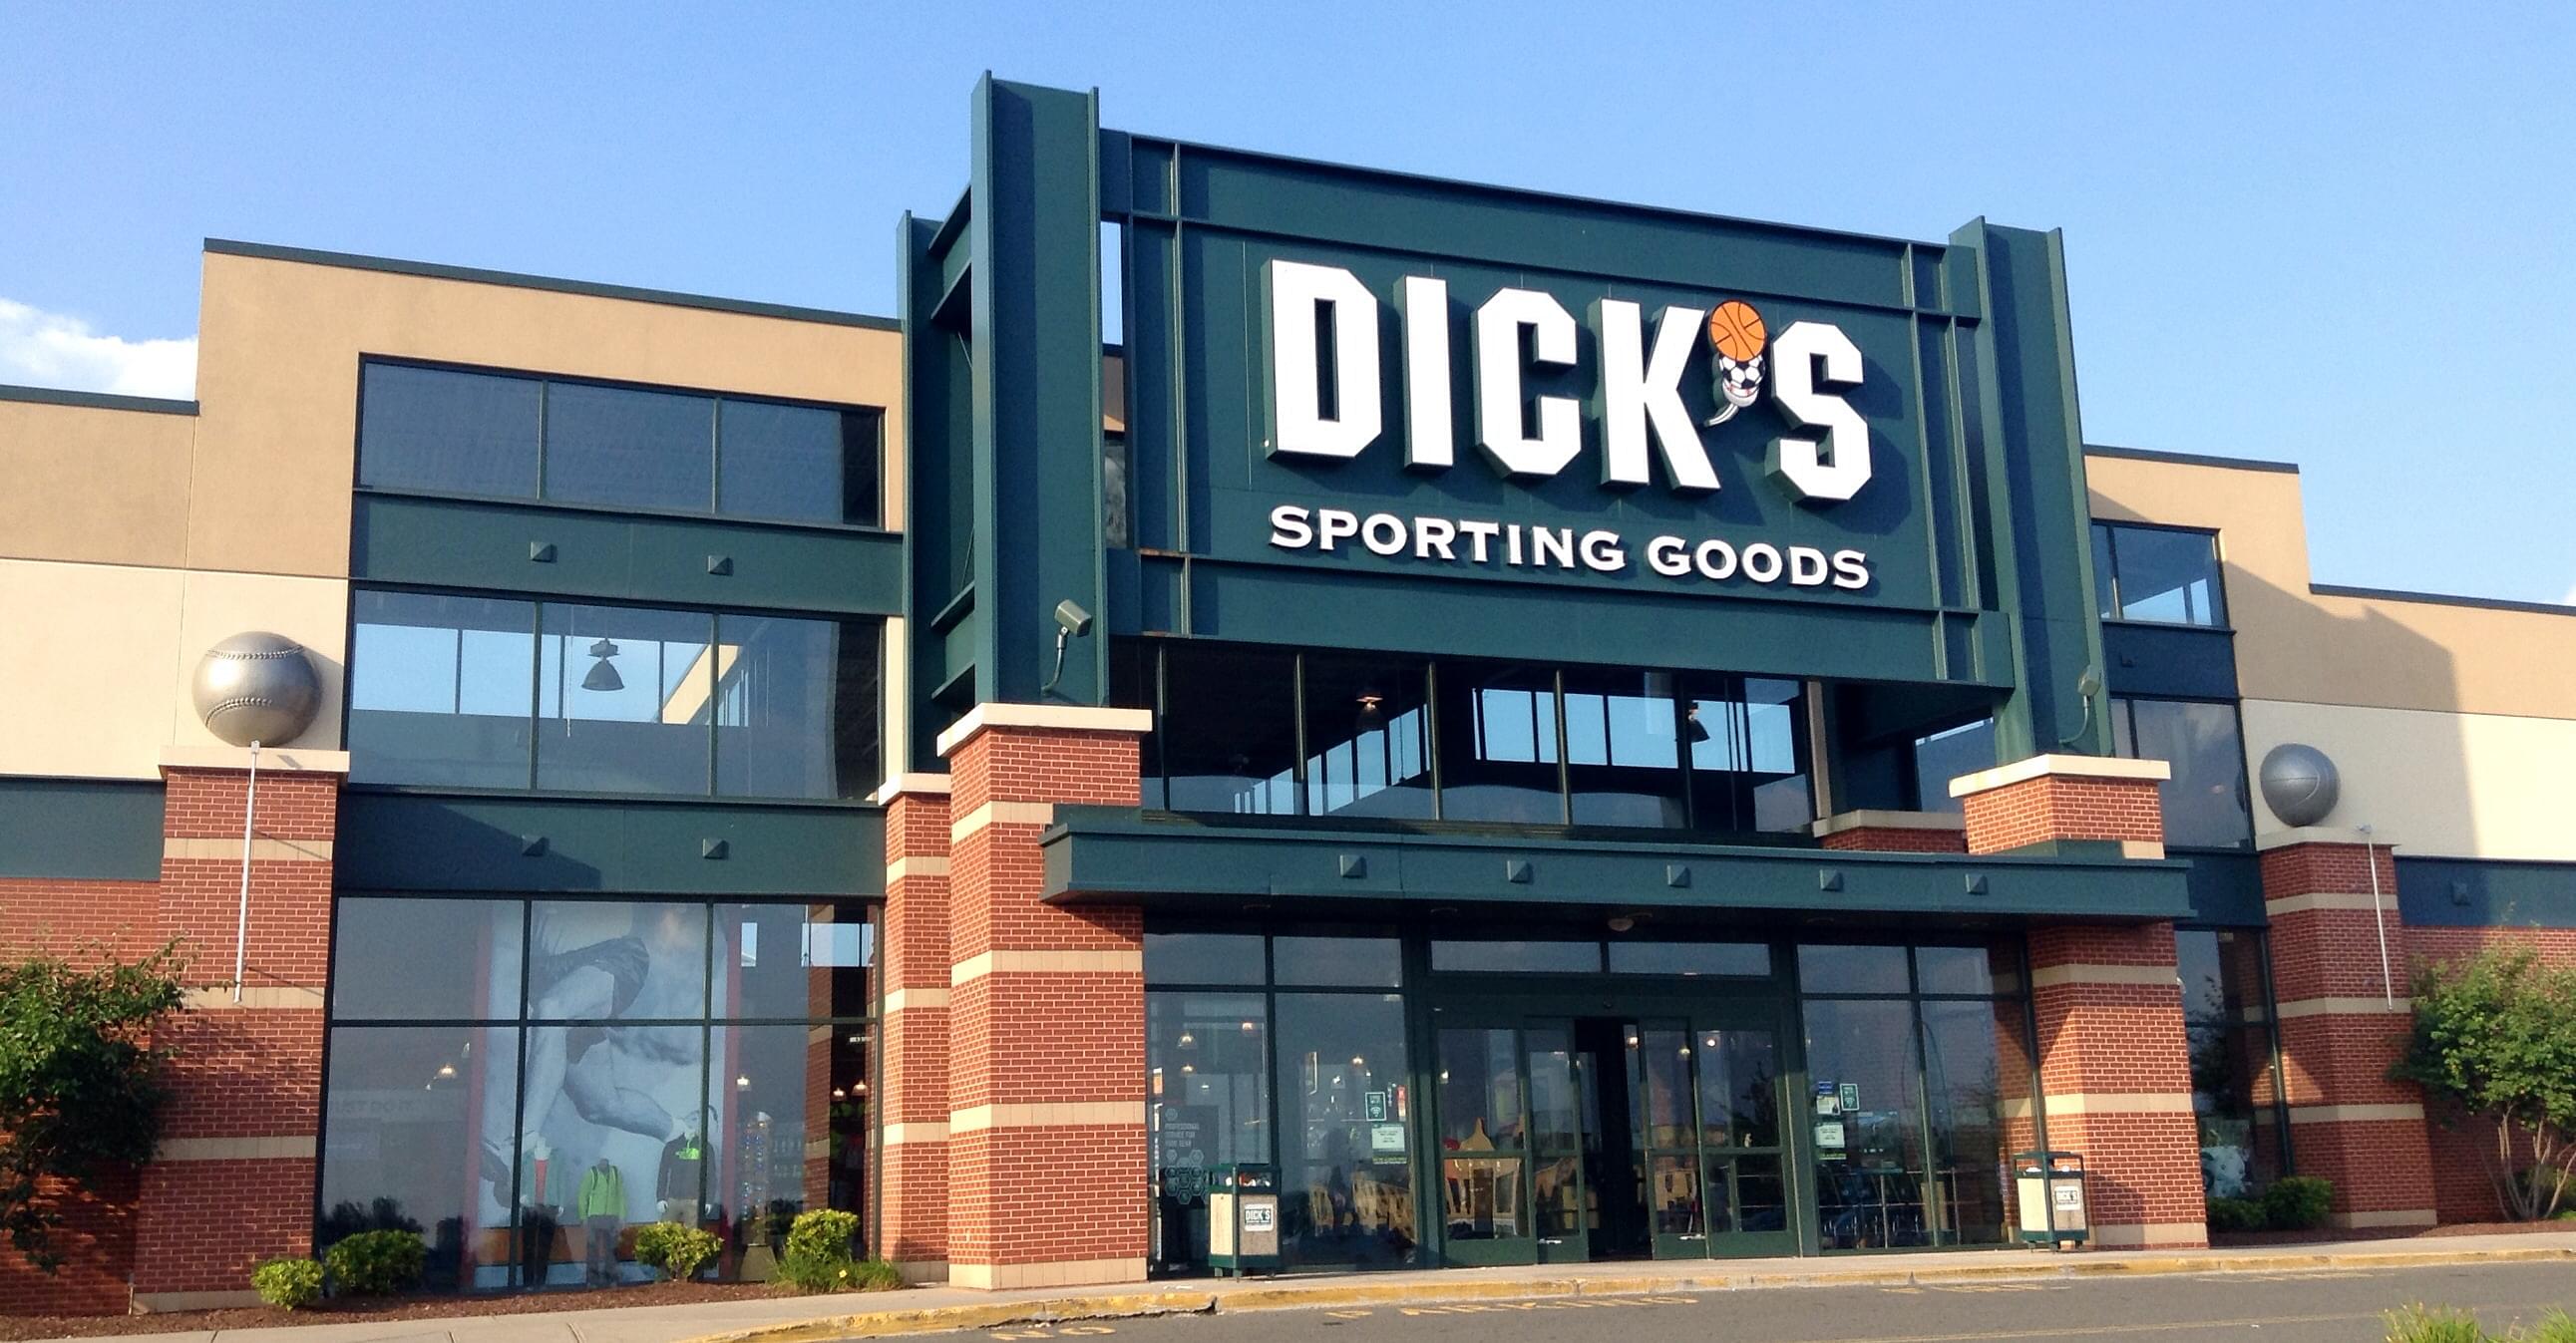 dicks-sporting-goods-black-friday-sale-2020-get-up-to-75-off-on